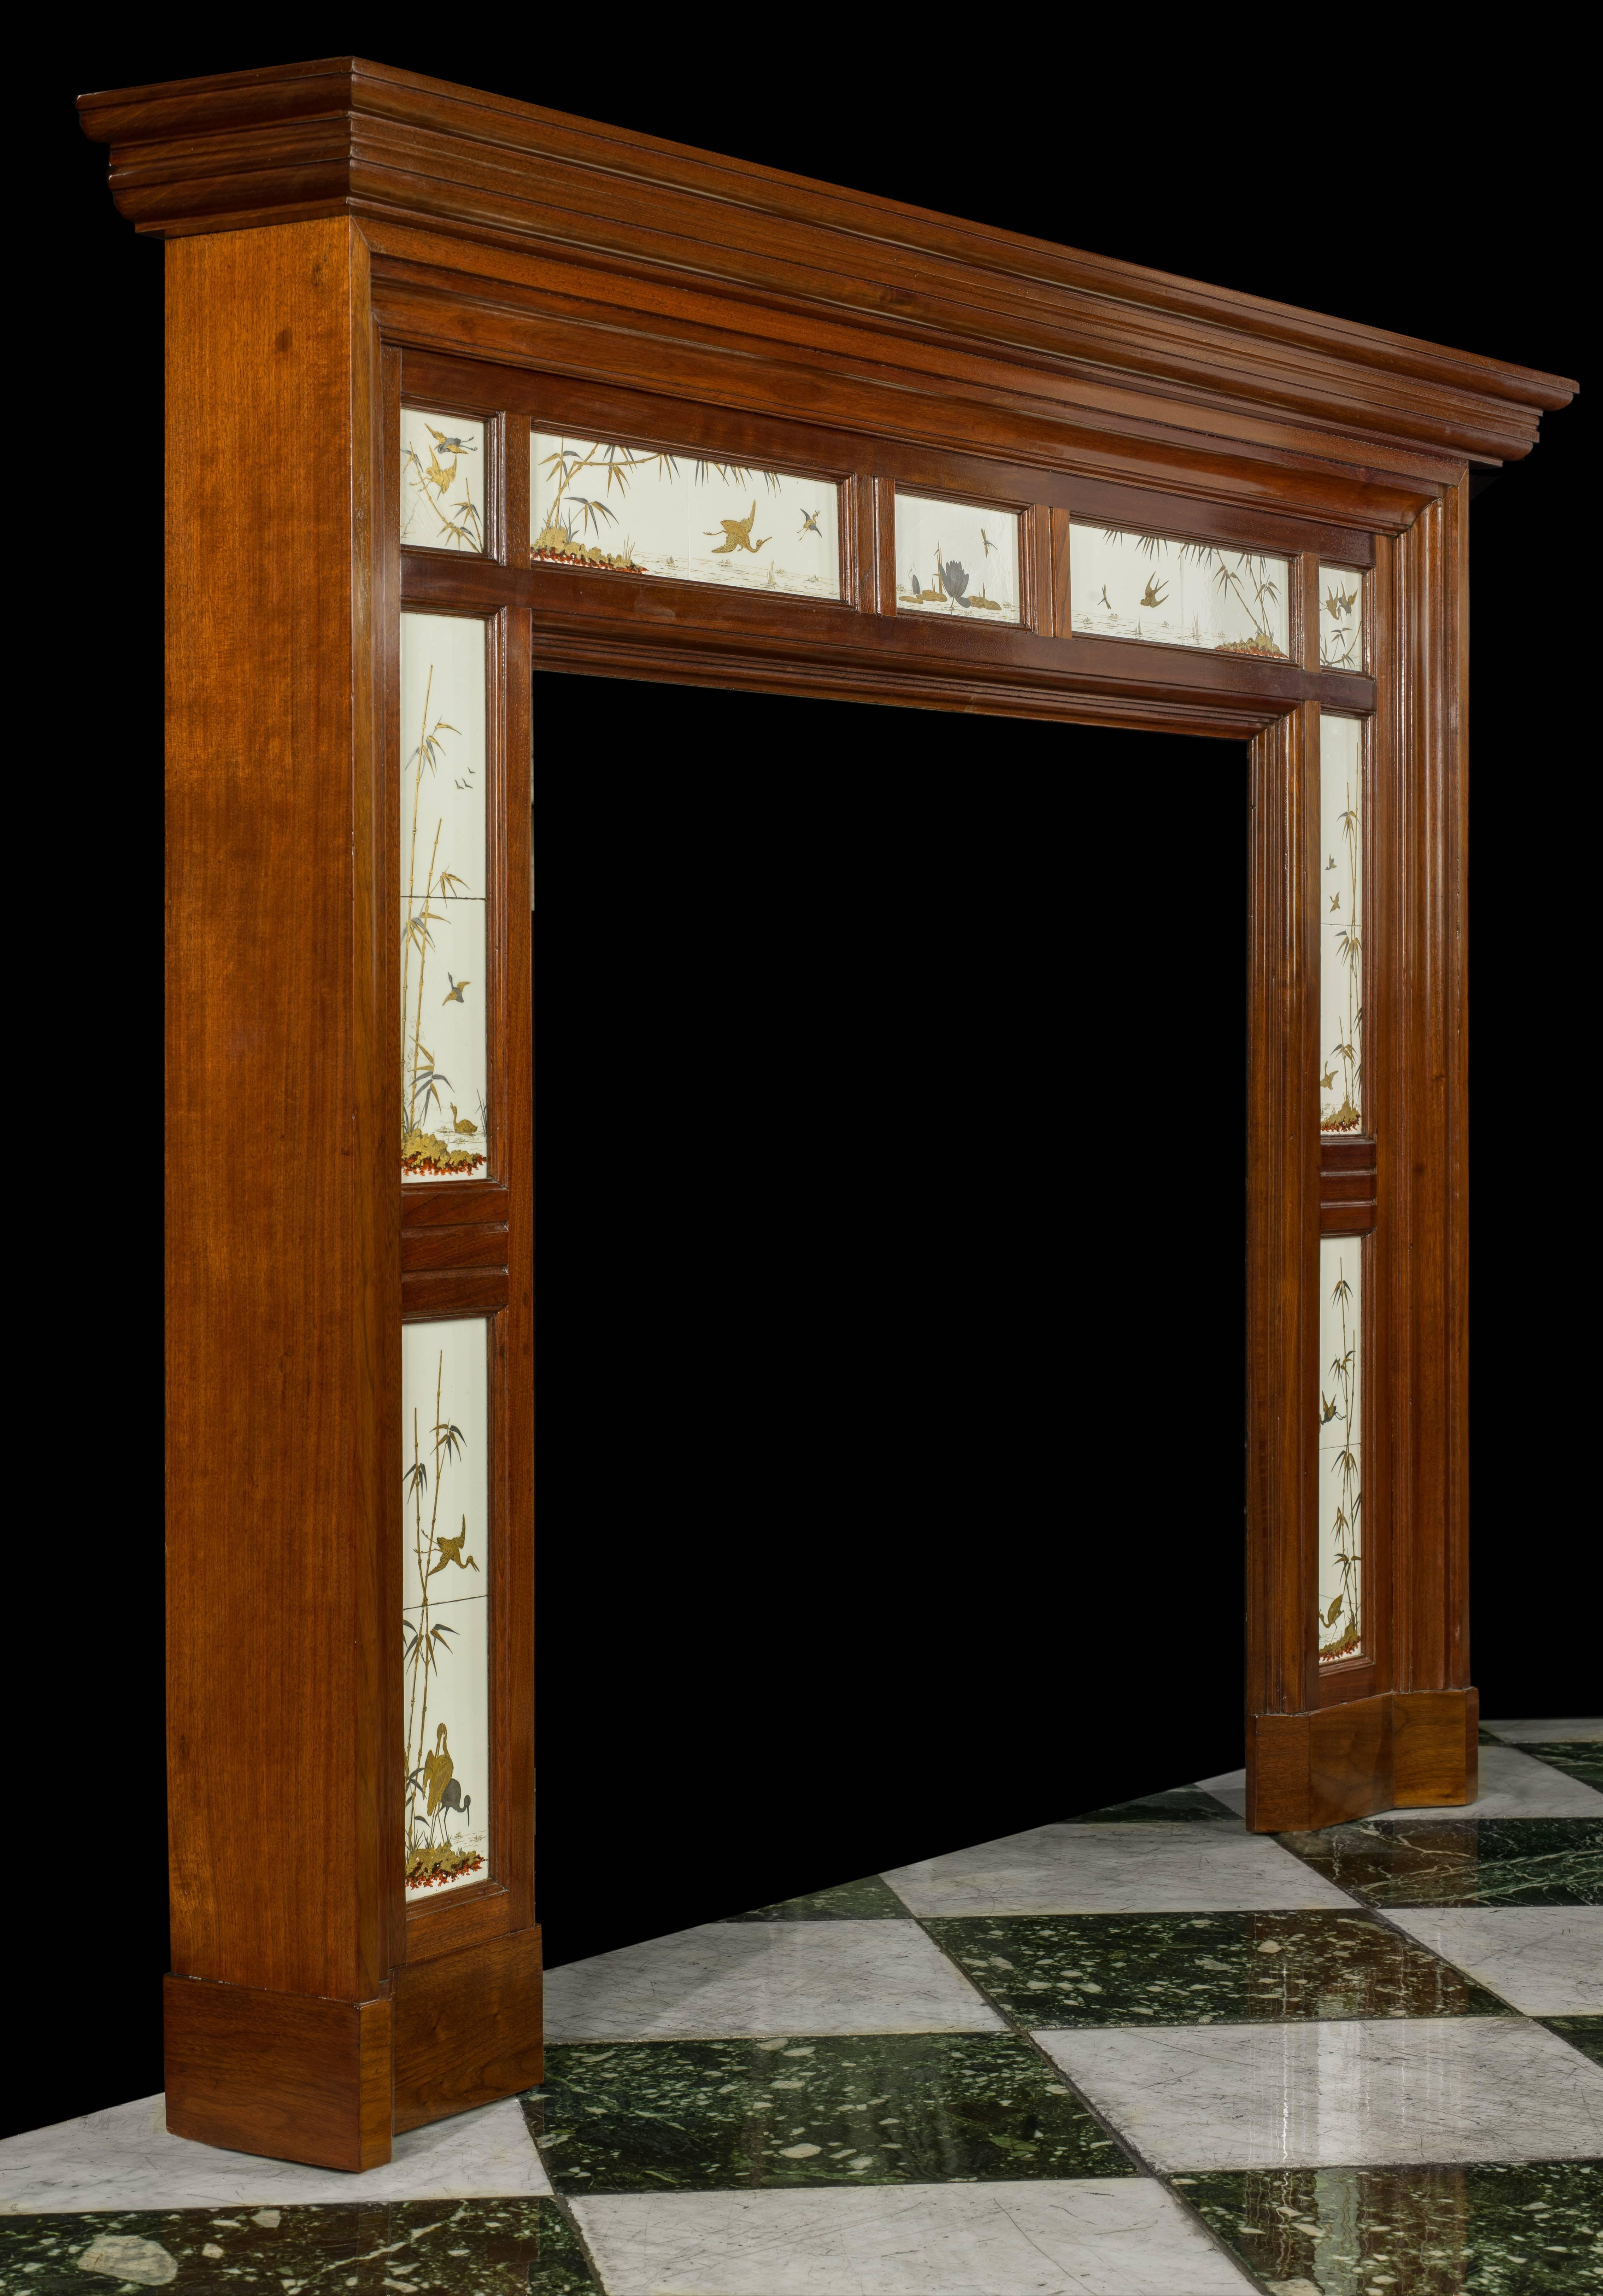 A simple panelled walnut fire surround set with very fine and rare Aesthetic Movement Tiles made by Minton & Company (1828-1868).

The tiles, exquisitely hand-painted in unburnished precious metals of fine gold, platinum and dragon red rhodium,